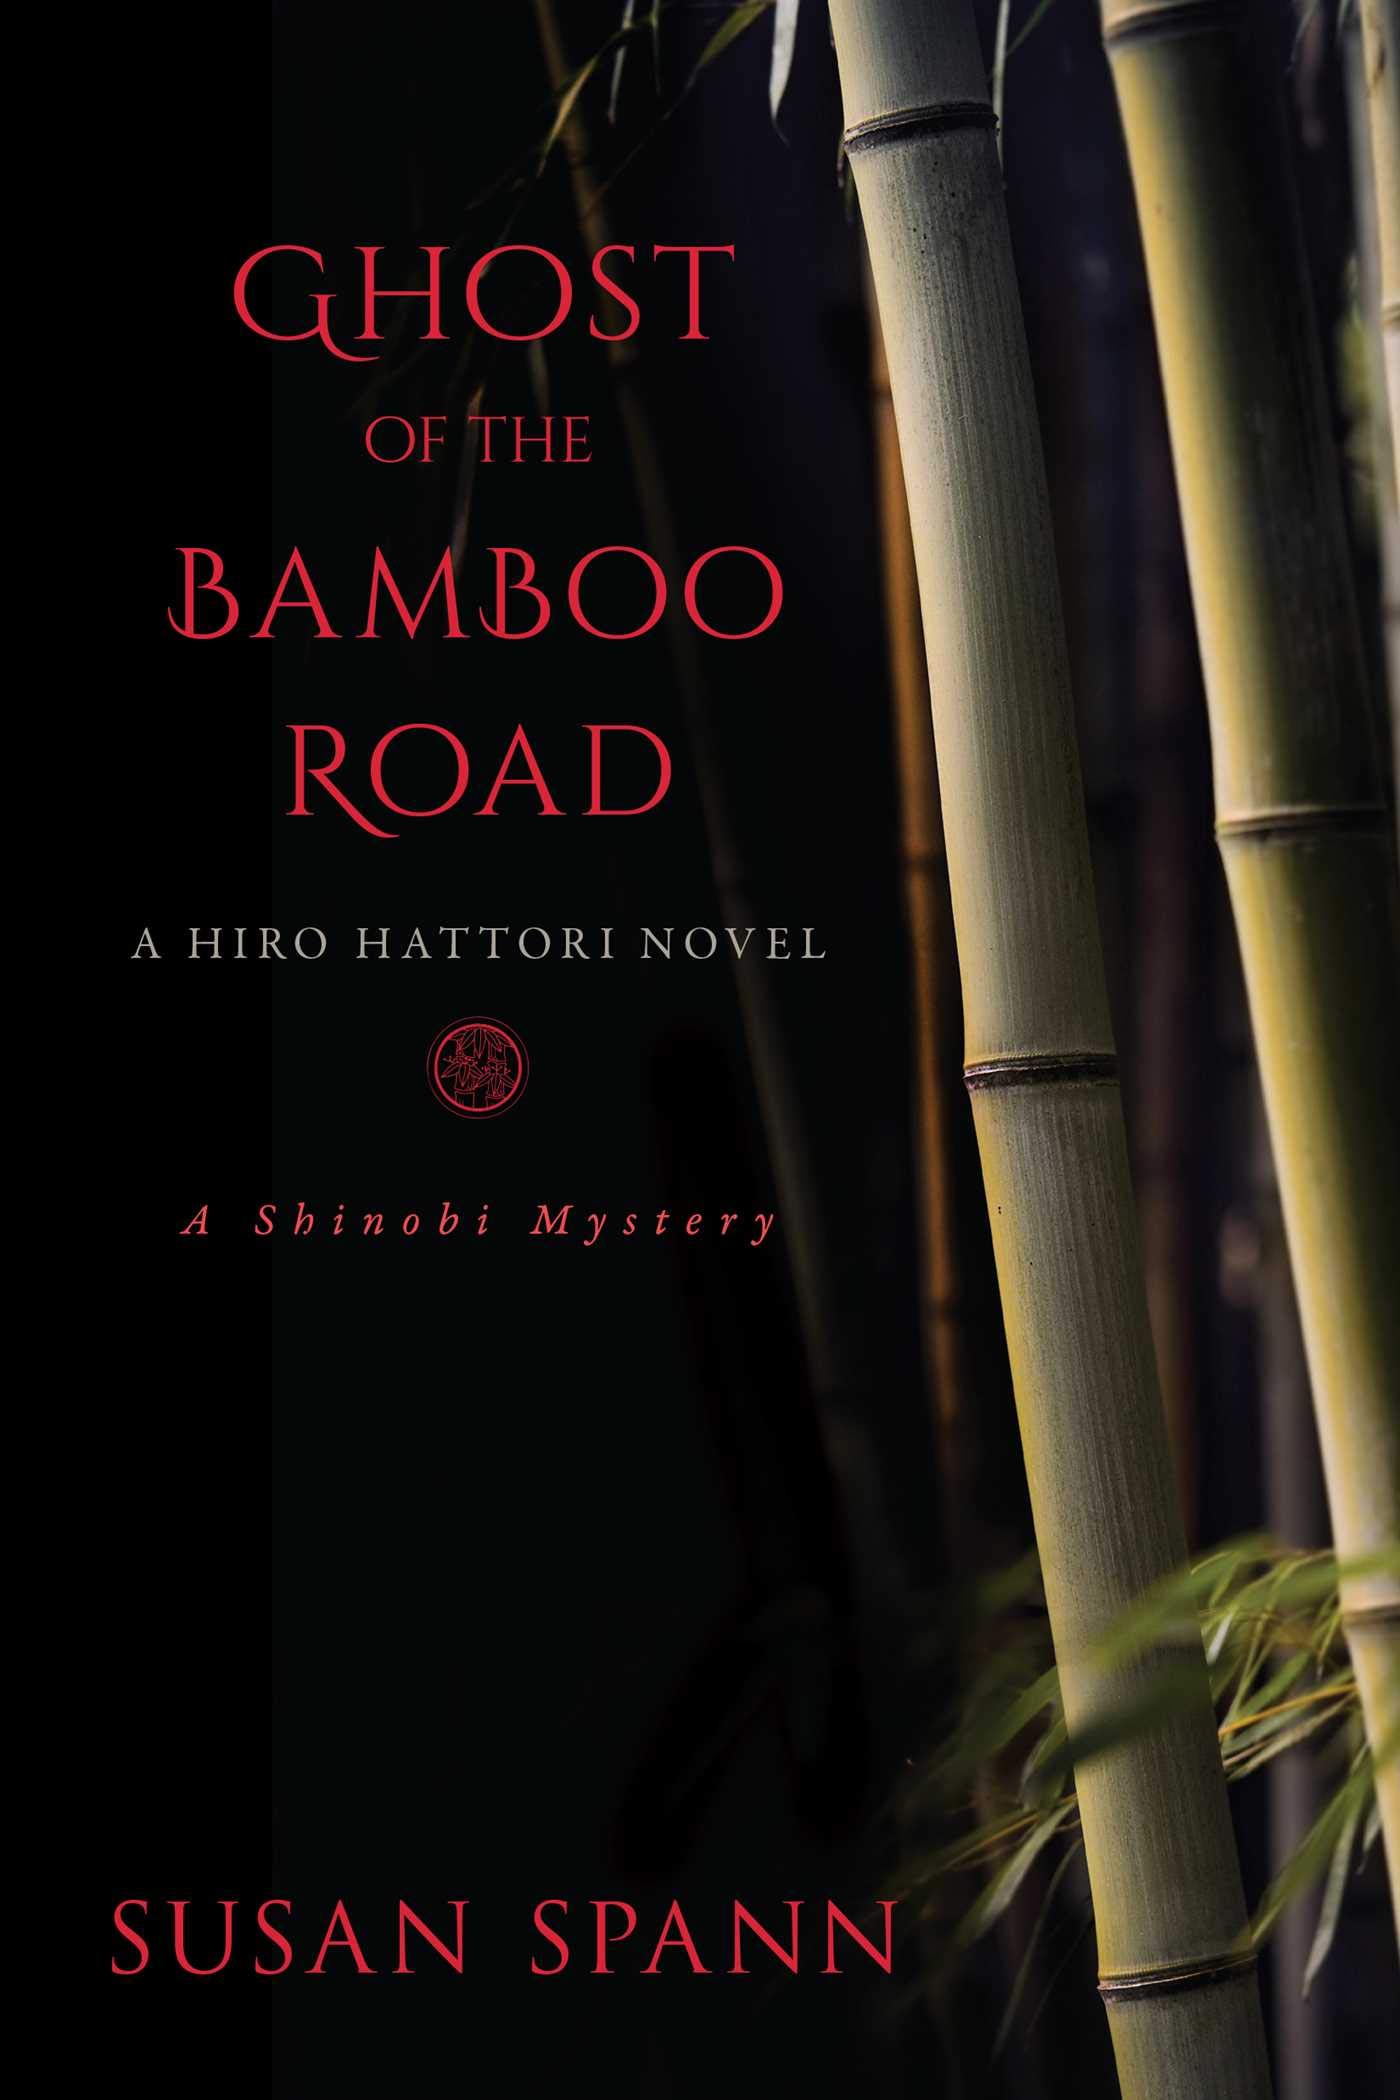 Ghost of the Bamboo Road: A Hiro Hattori Novel